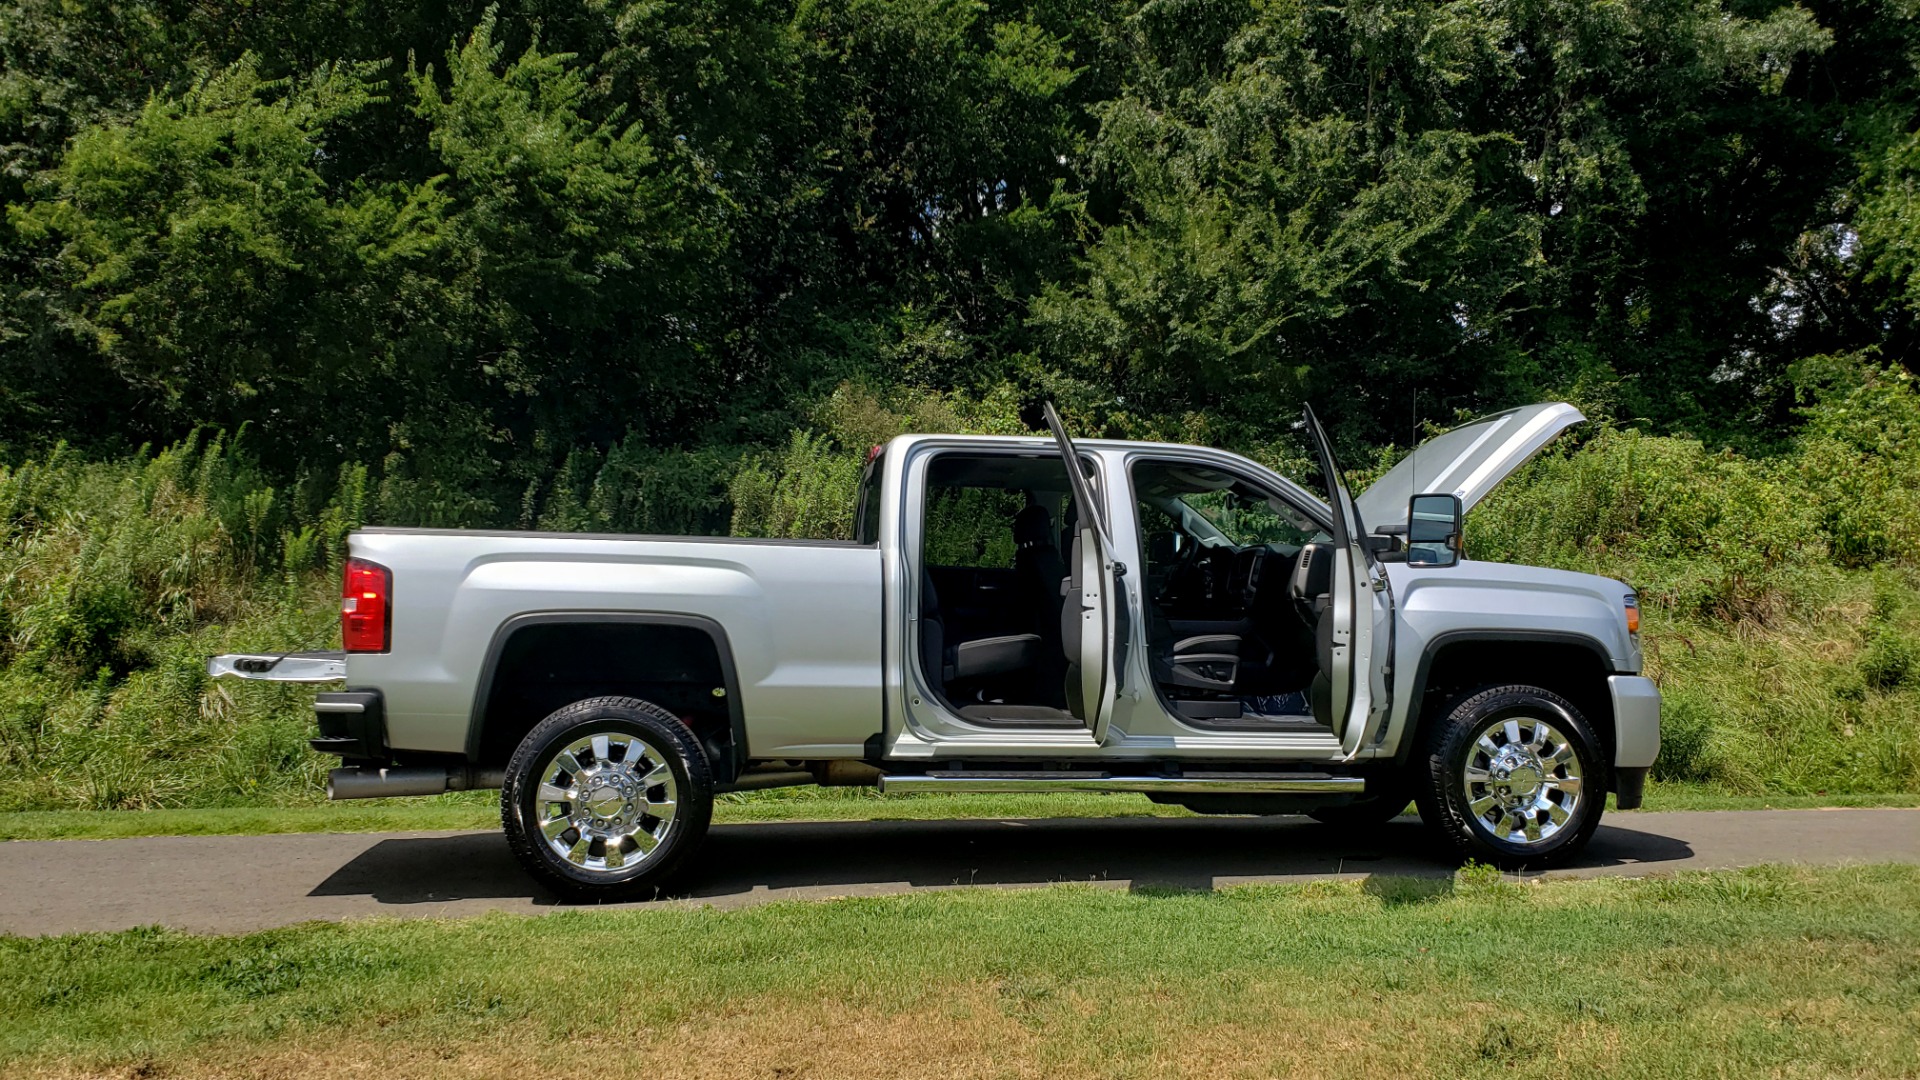 Used 2018 GMC SIERRA 2500HD DENALI 4WD / 6.6L DURAMAX / NAV / SUNROOF / BOSE / REARVIEW for sale Sold at Formula Imports in Charlotte NC 28227 29